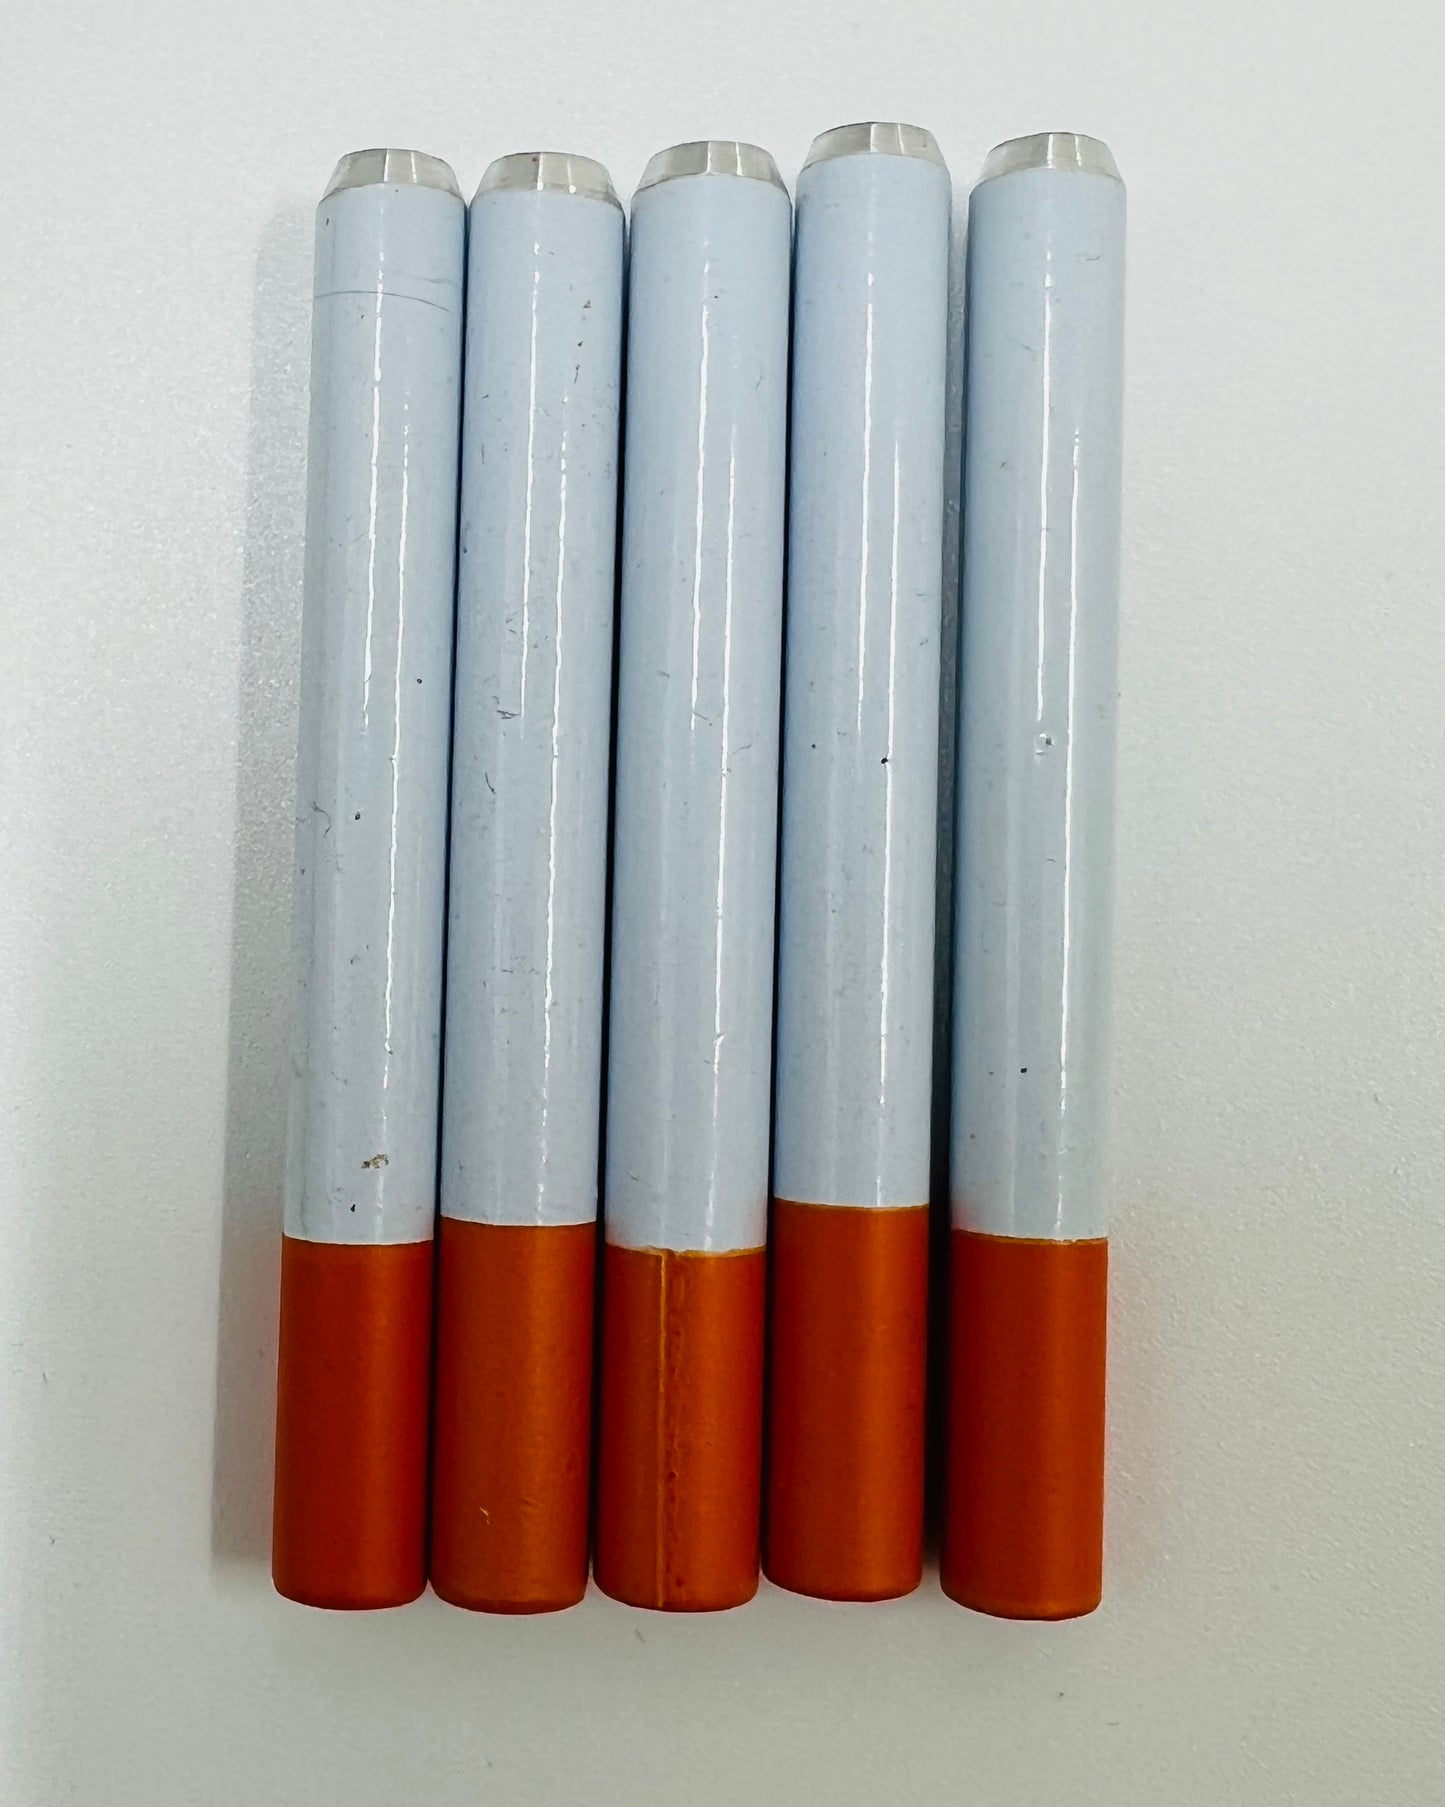 Metal Cigarette One-Hitter 100 Counts Pack in 2 Sizes